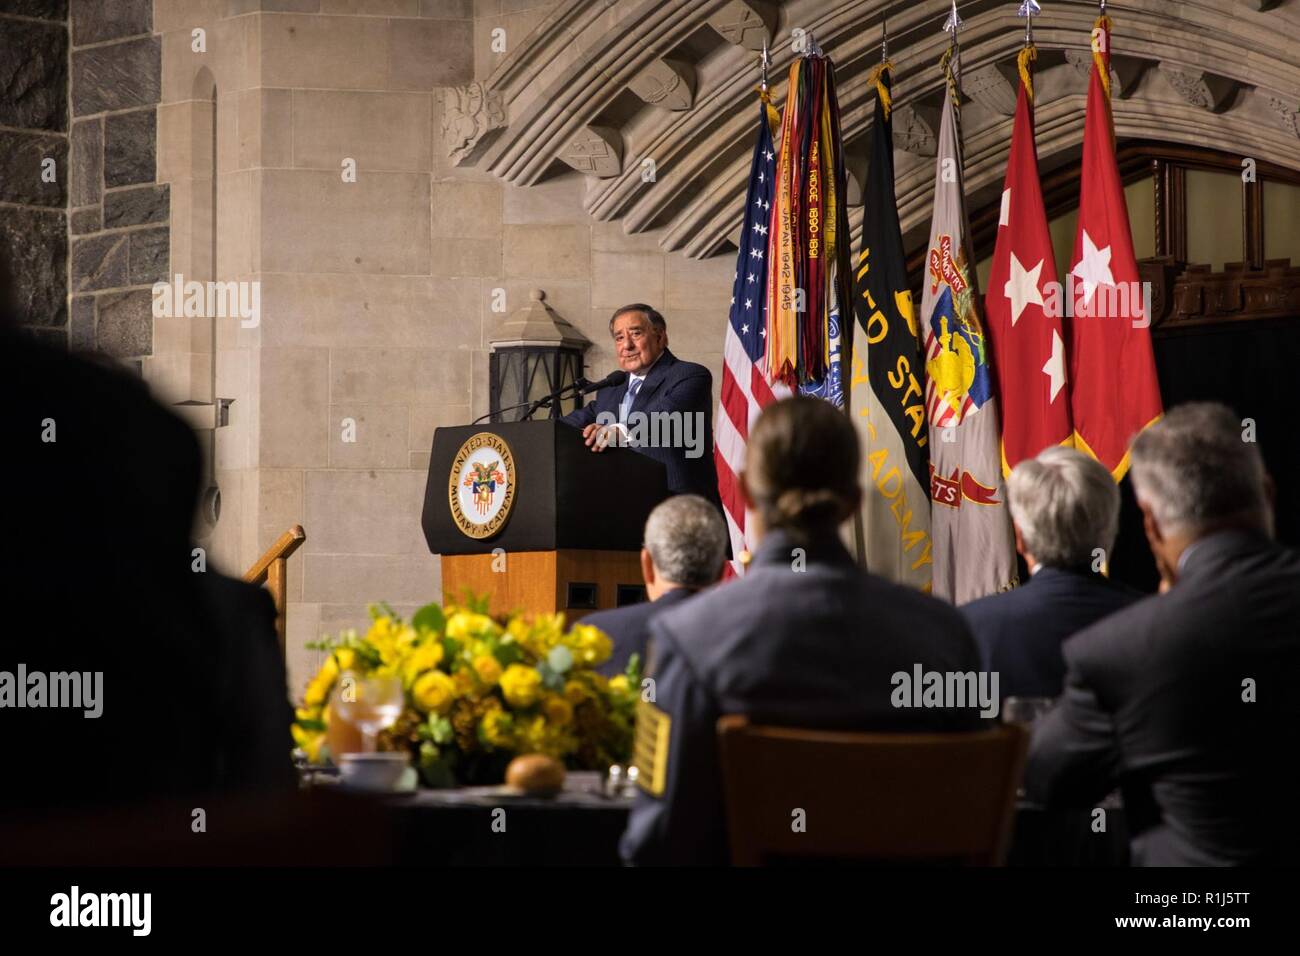 The 23rd U.S. Secretary of Defense Leon Panetta receives the 2018 Sylvanus Thayer Award presented by the West Point Association of Graduates, Oct. 4, 2018 at the U.S. Military Academy at West Point. The Thayer Award is given to a citizen of the United States, other than a West Point graduate, whose outstanding character, accomplishments, and stature in the civilian community draw wholesome comparison to the qualities for which West Point strives, in keeping with its motto: “Duty, Honor, Country.” Stock Photo